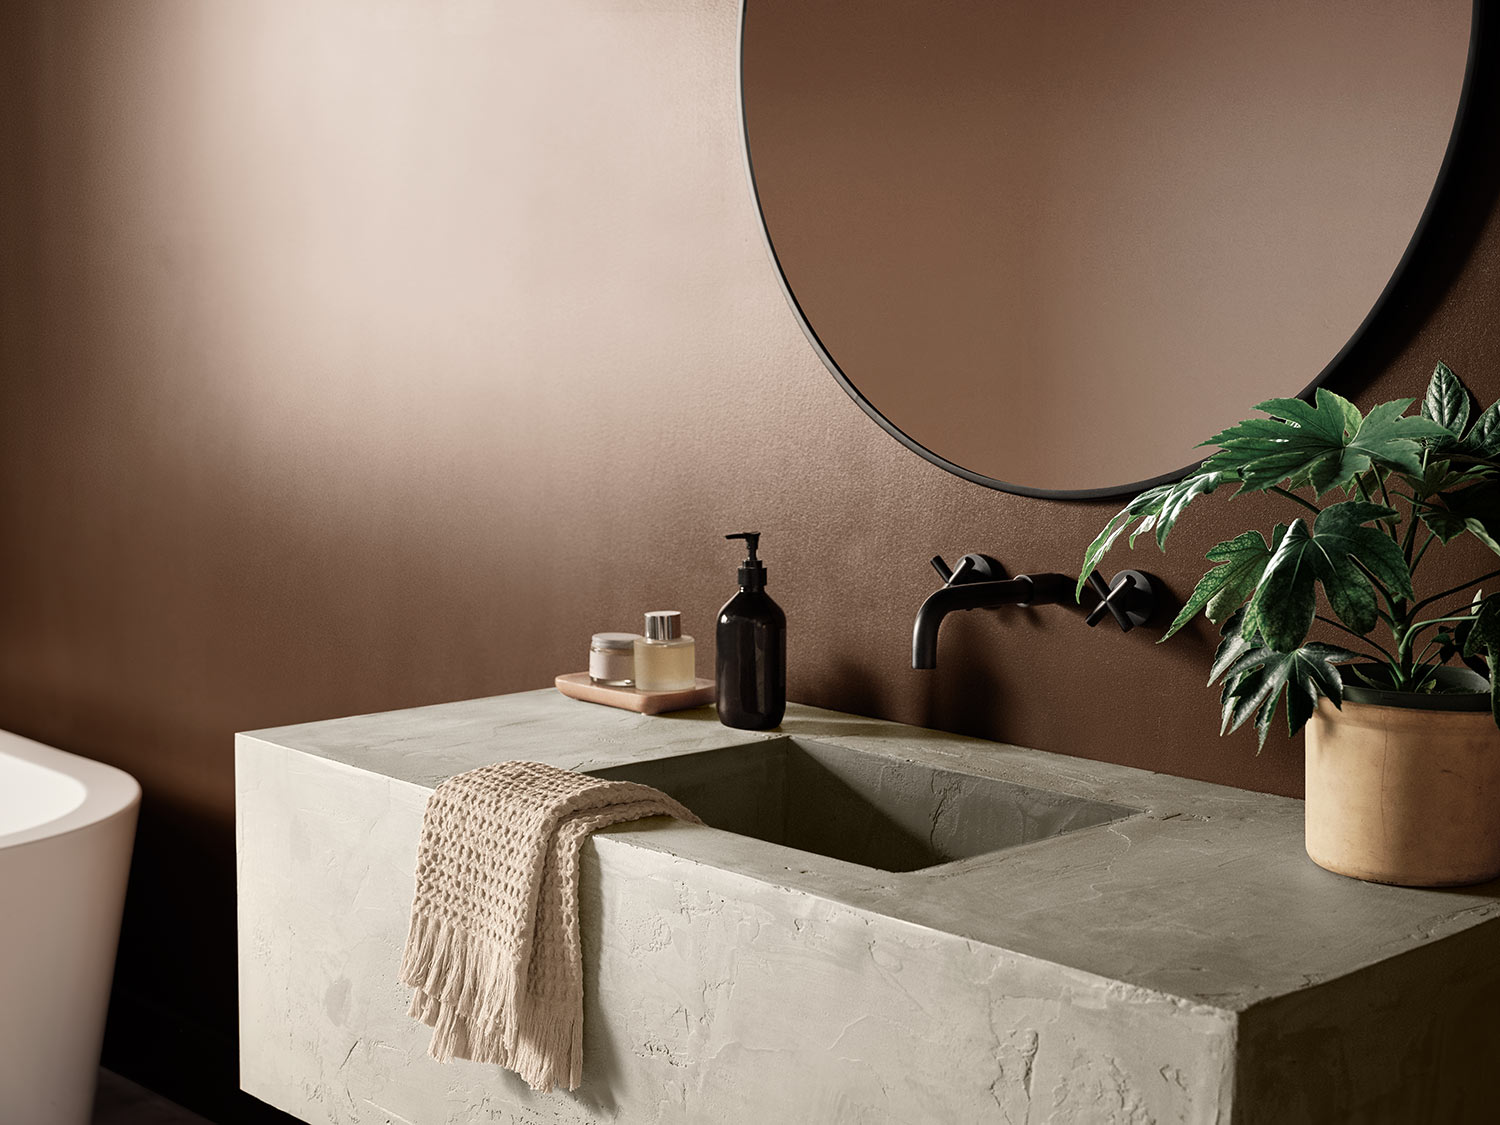 Bathroom with modern concrete block sink with a plant, circular mirror and walls painted Java SW 6090